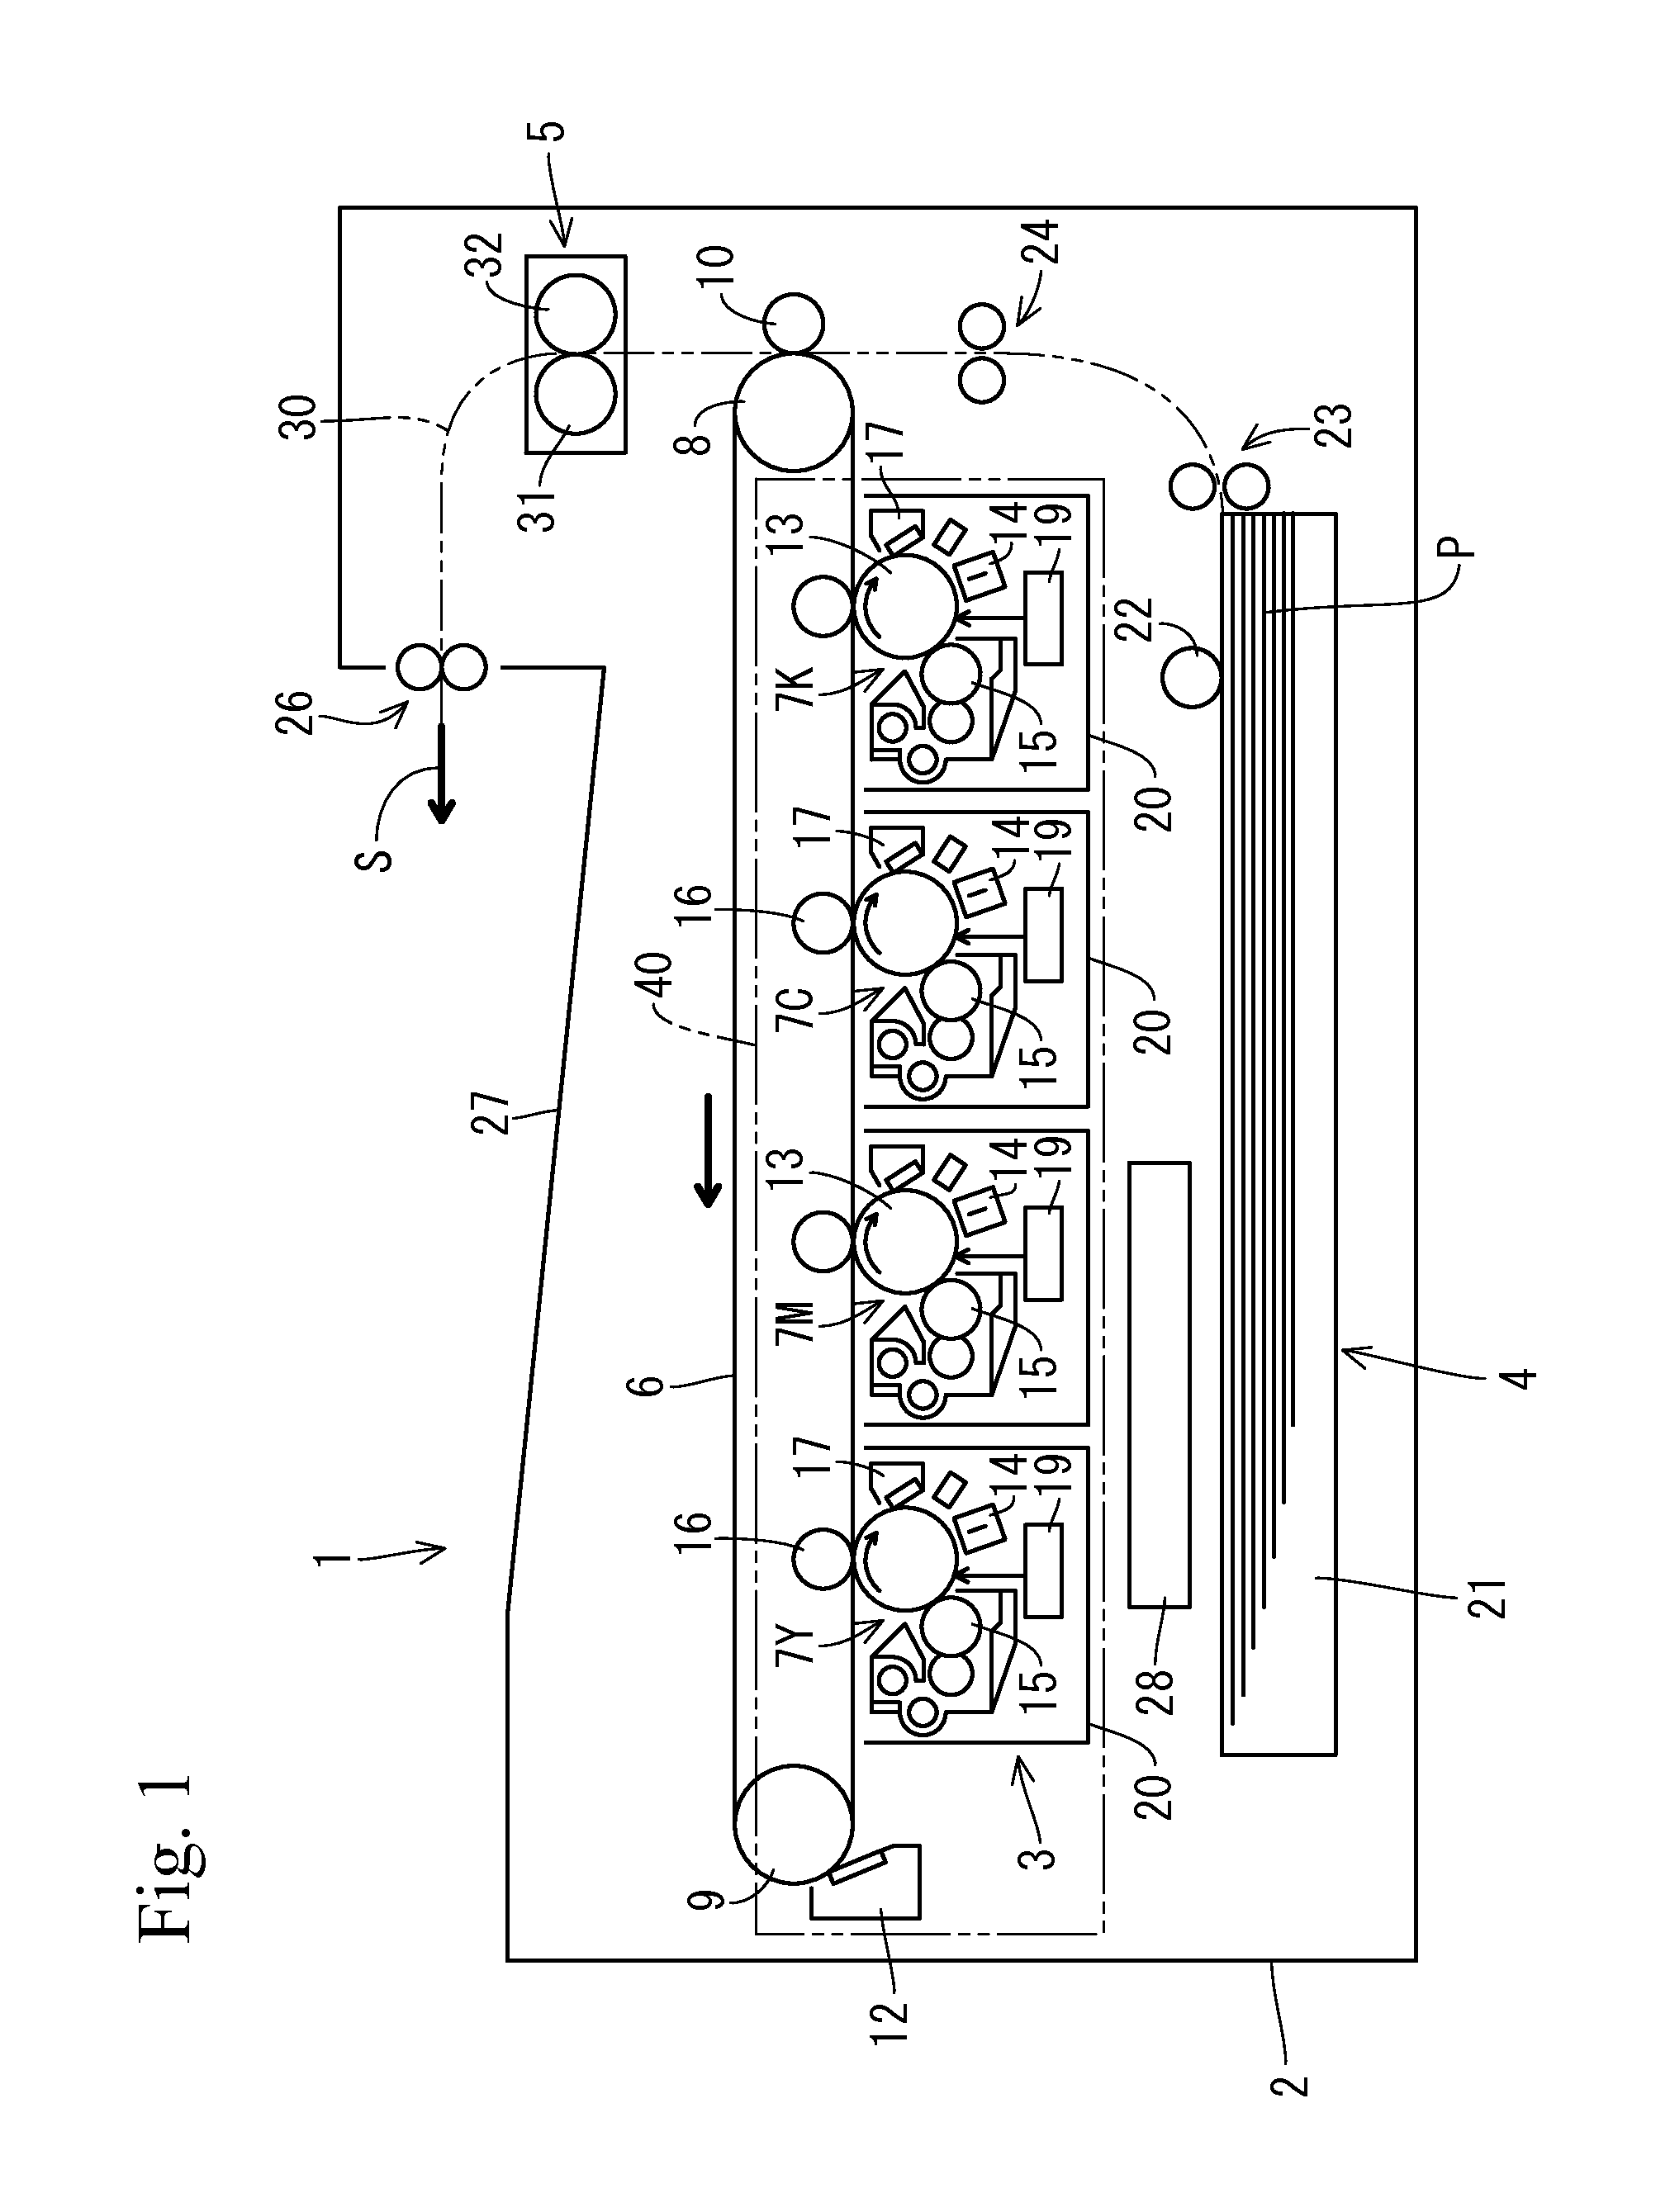 Waste toner collector and image forming apparatus